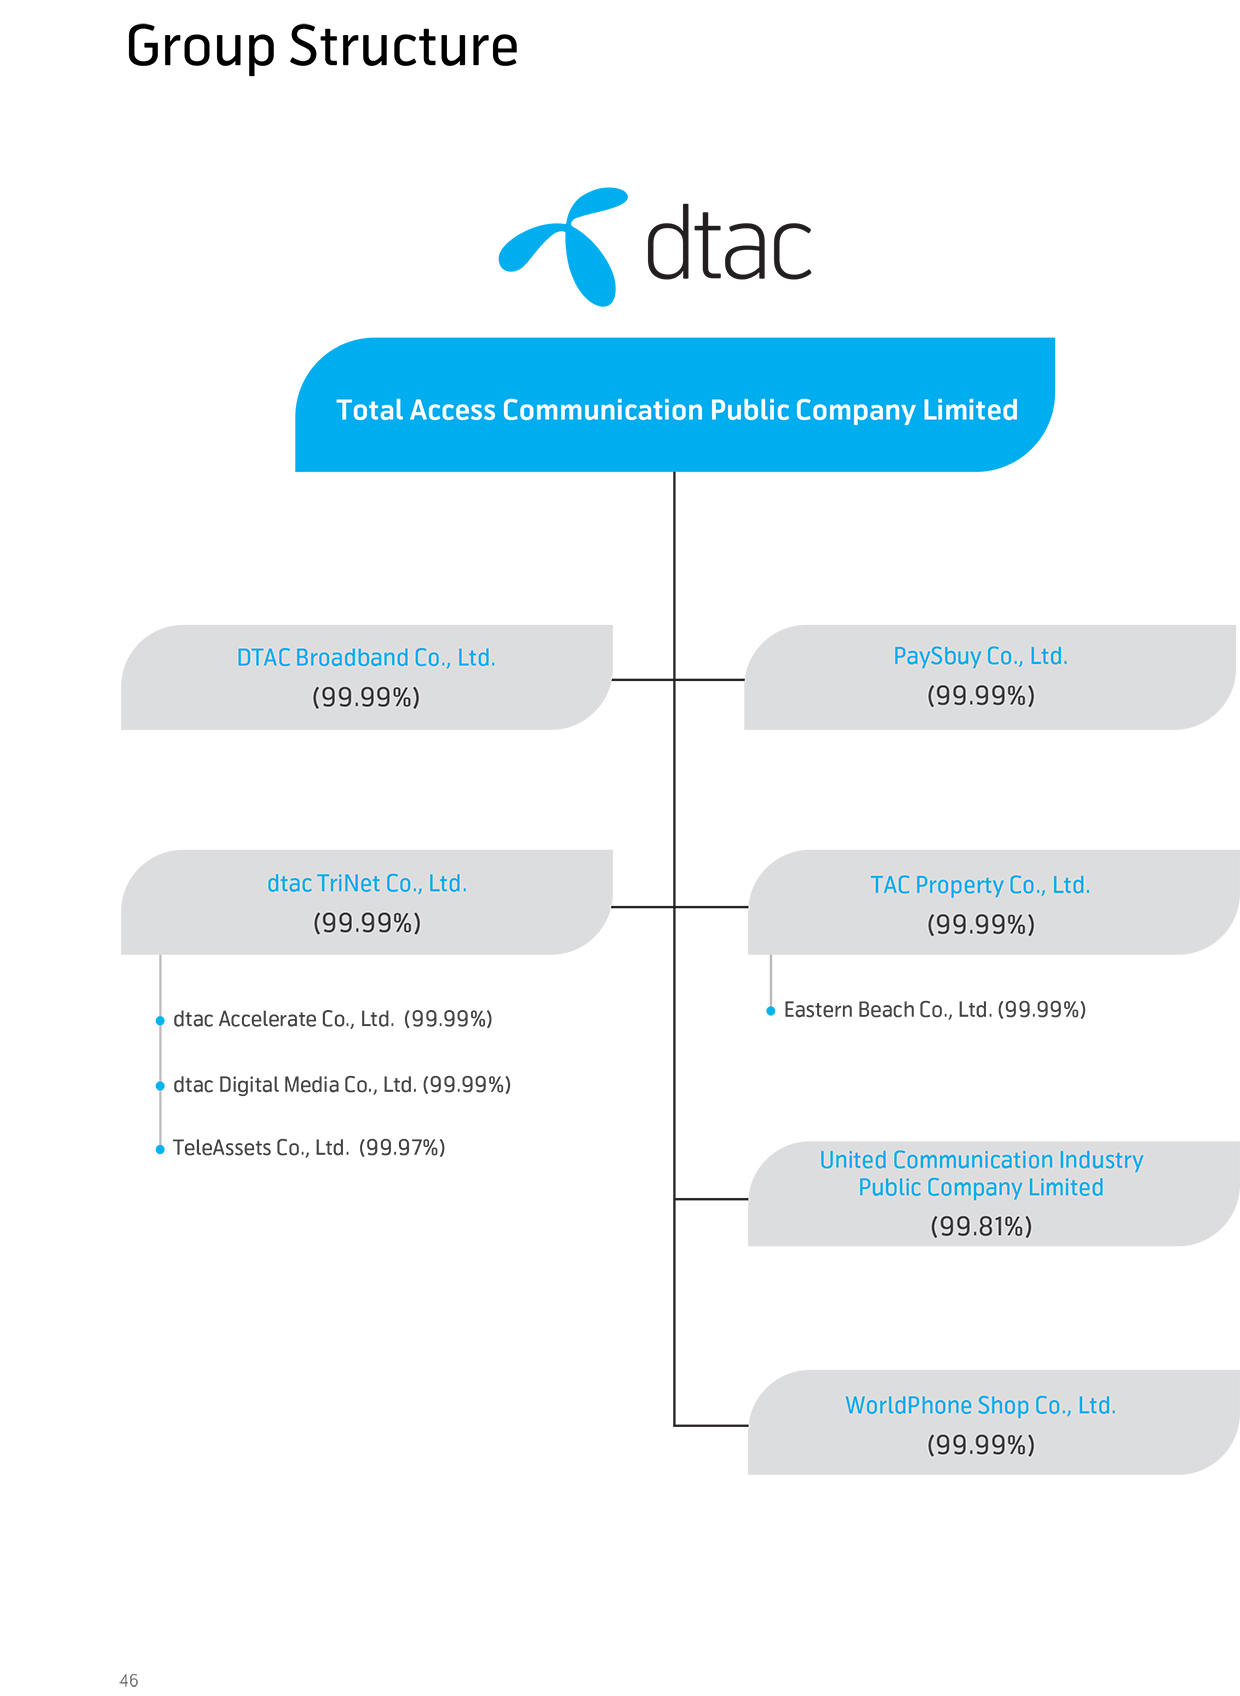 Group Structure | dtac